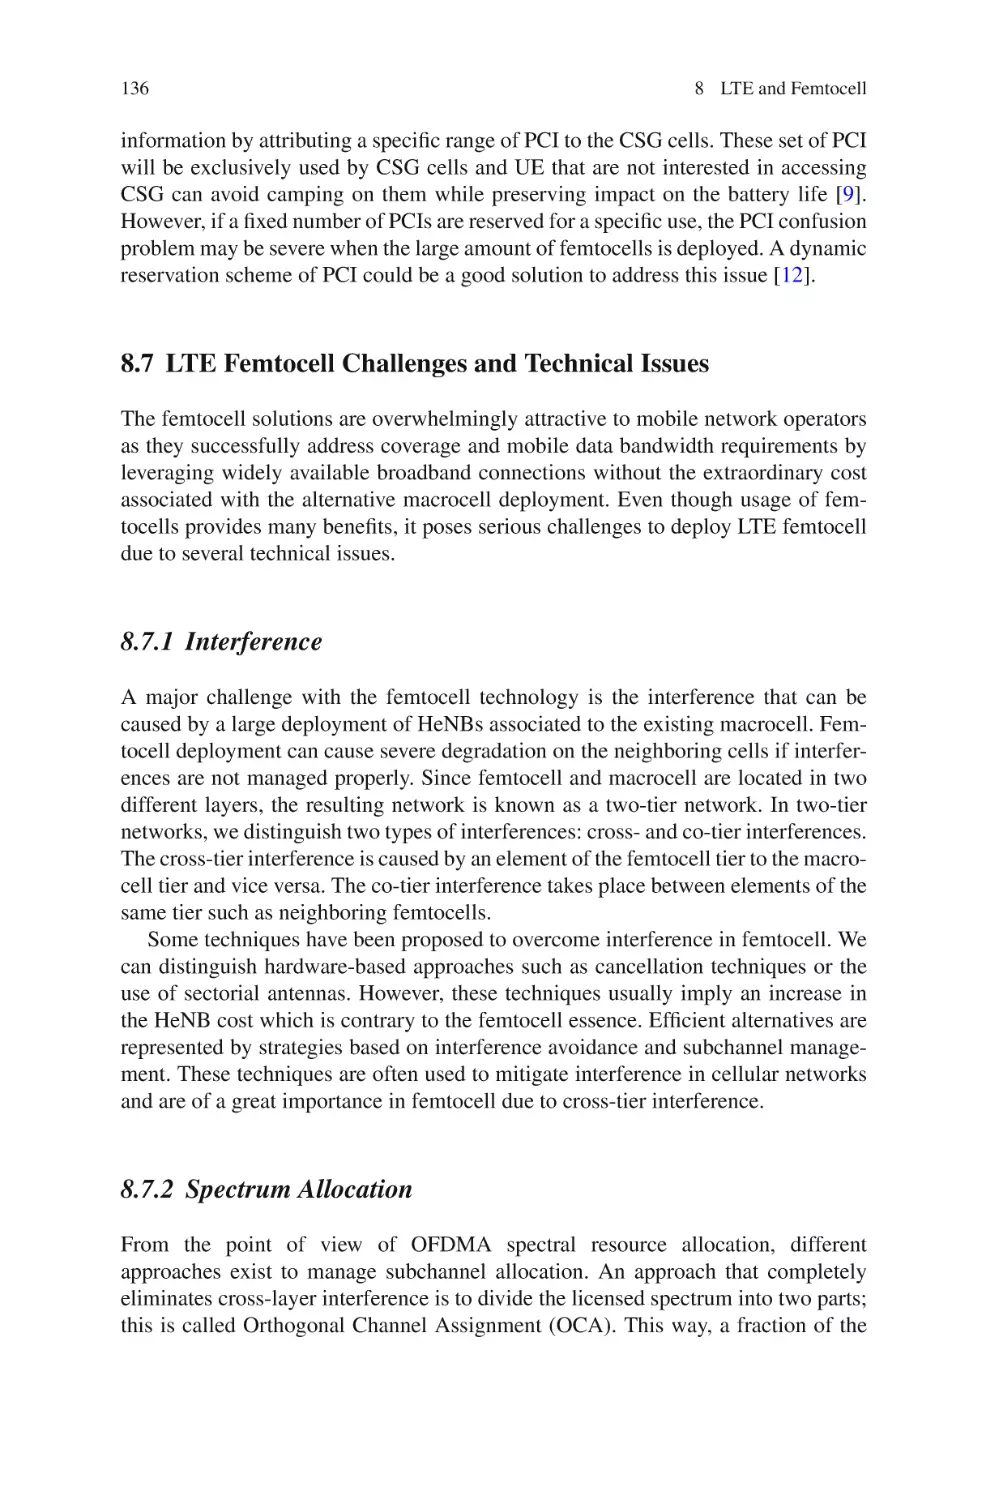 8.7  LTE Femtocell Challenges and Technical Issues
8.7.1  Interference
8.7.2  Spectrum Allocation